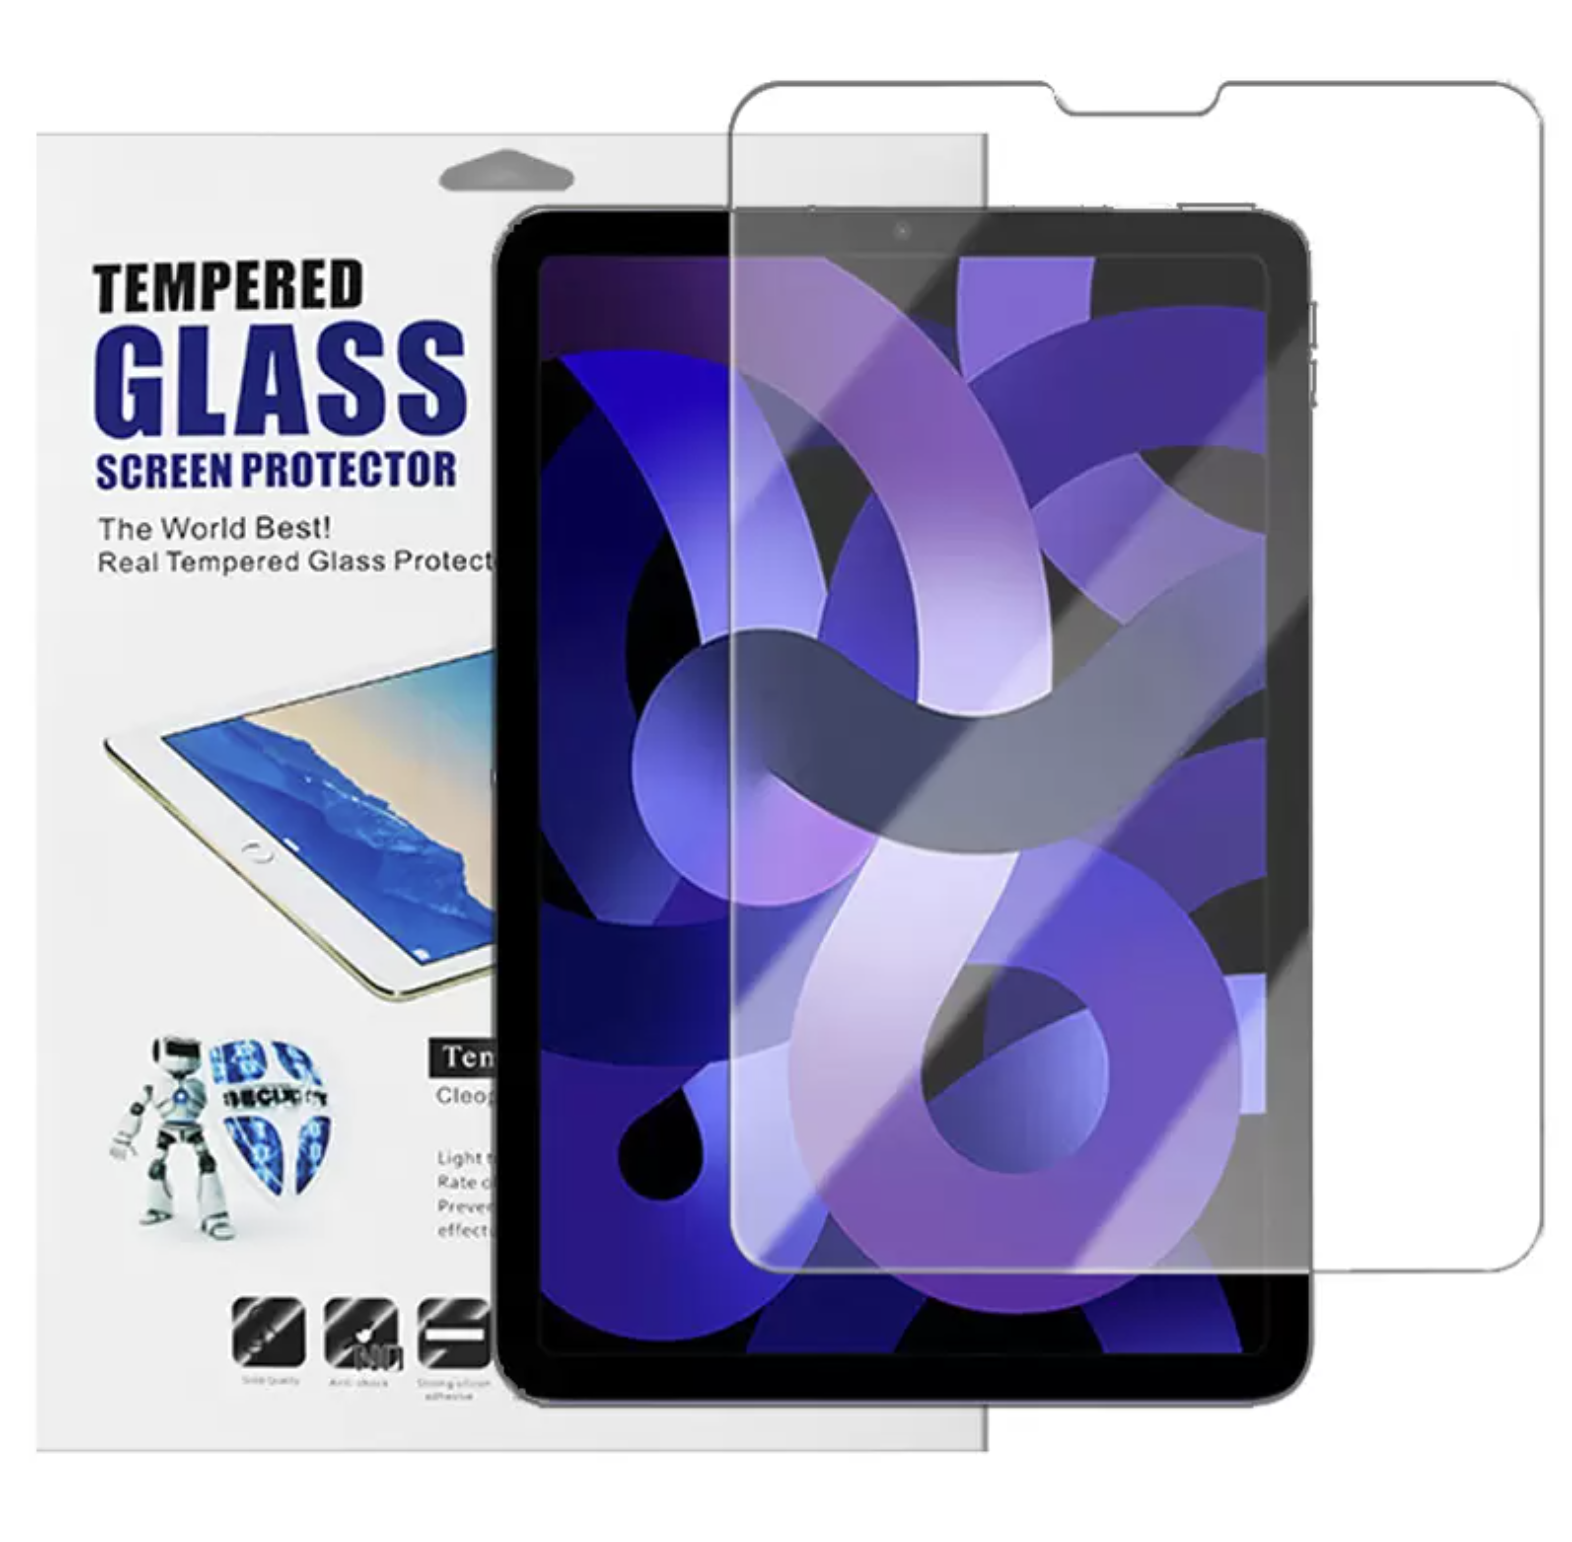 Premium 9H Temepered Glass Protector For Ipad 9.7 